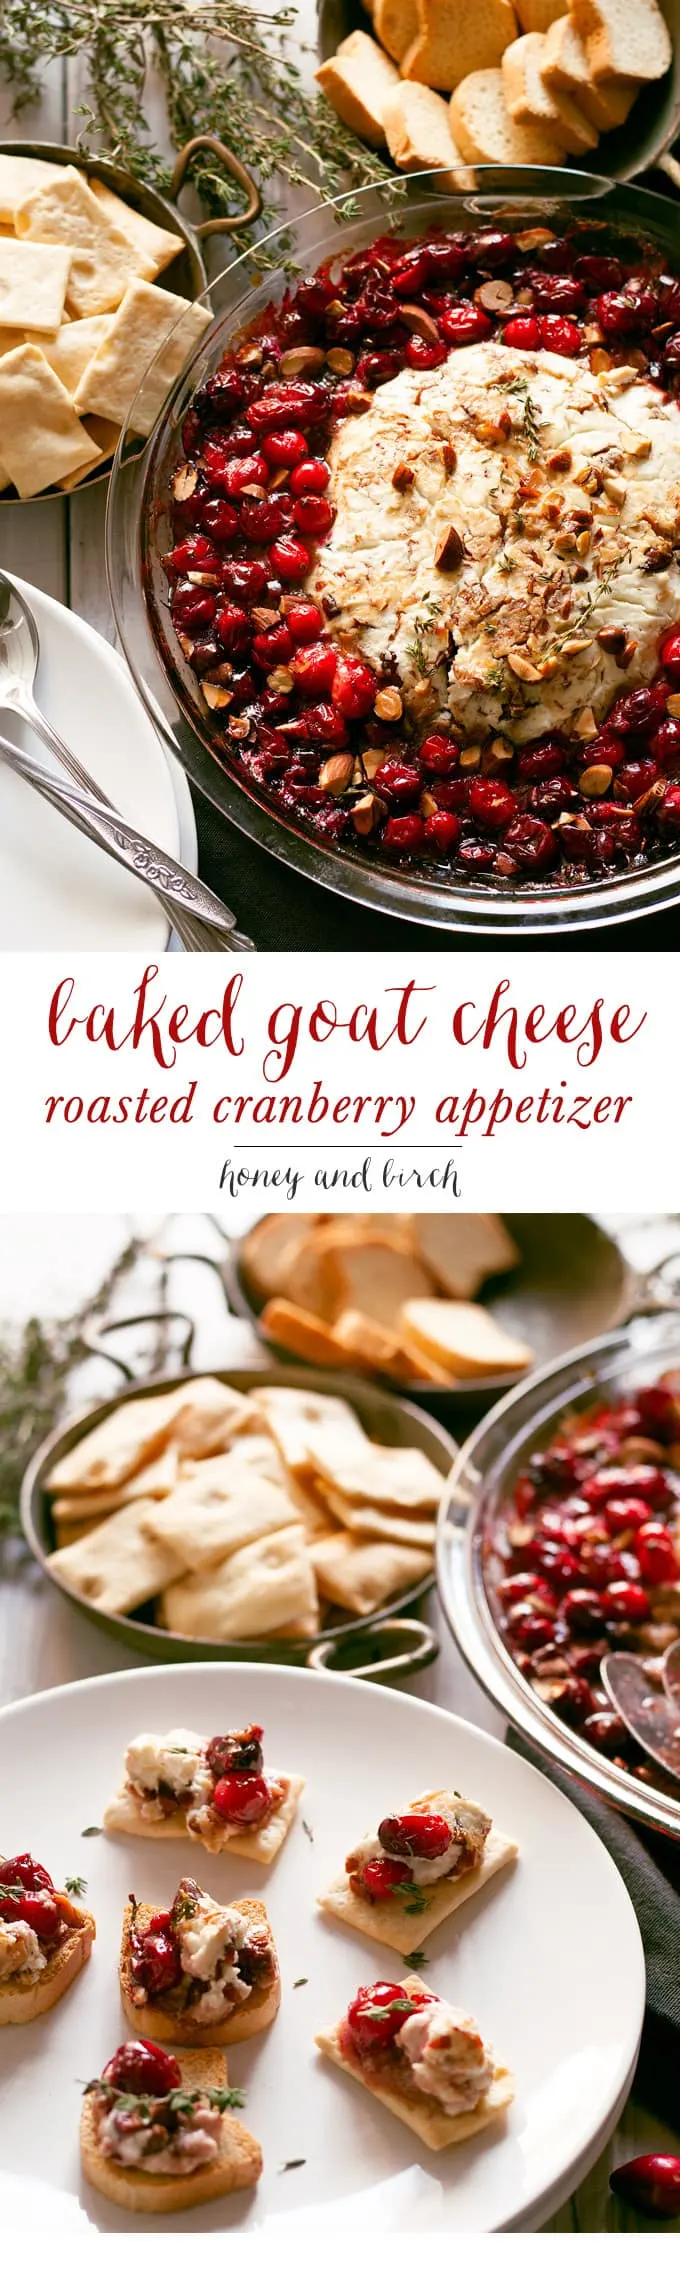 baked goat cheese roasted cranberry appetizer pin